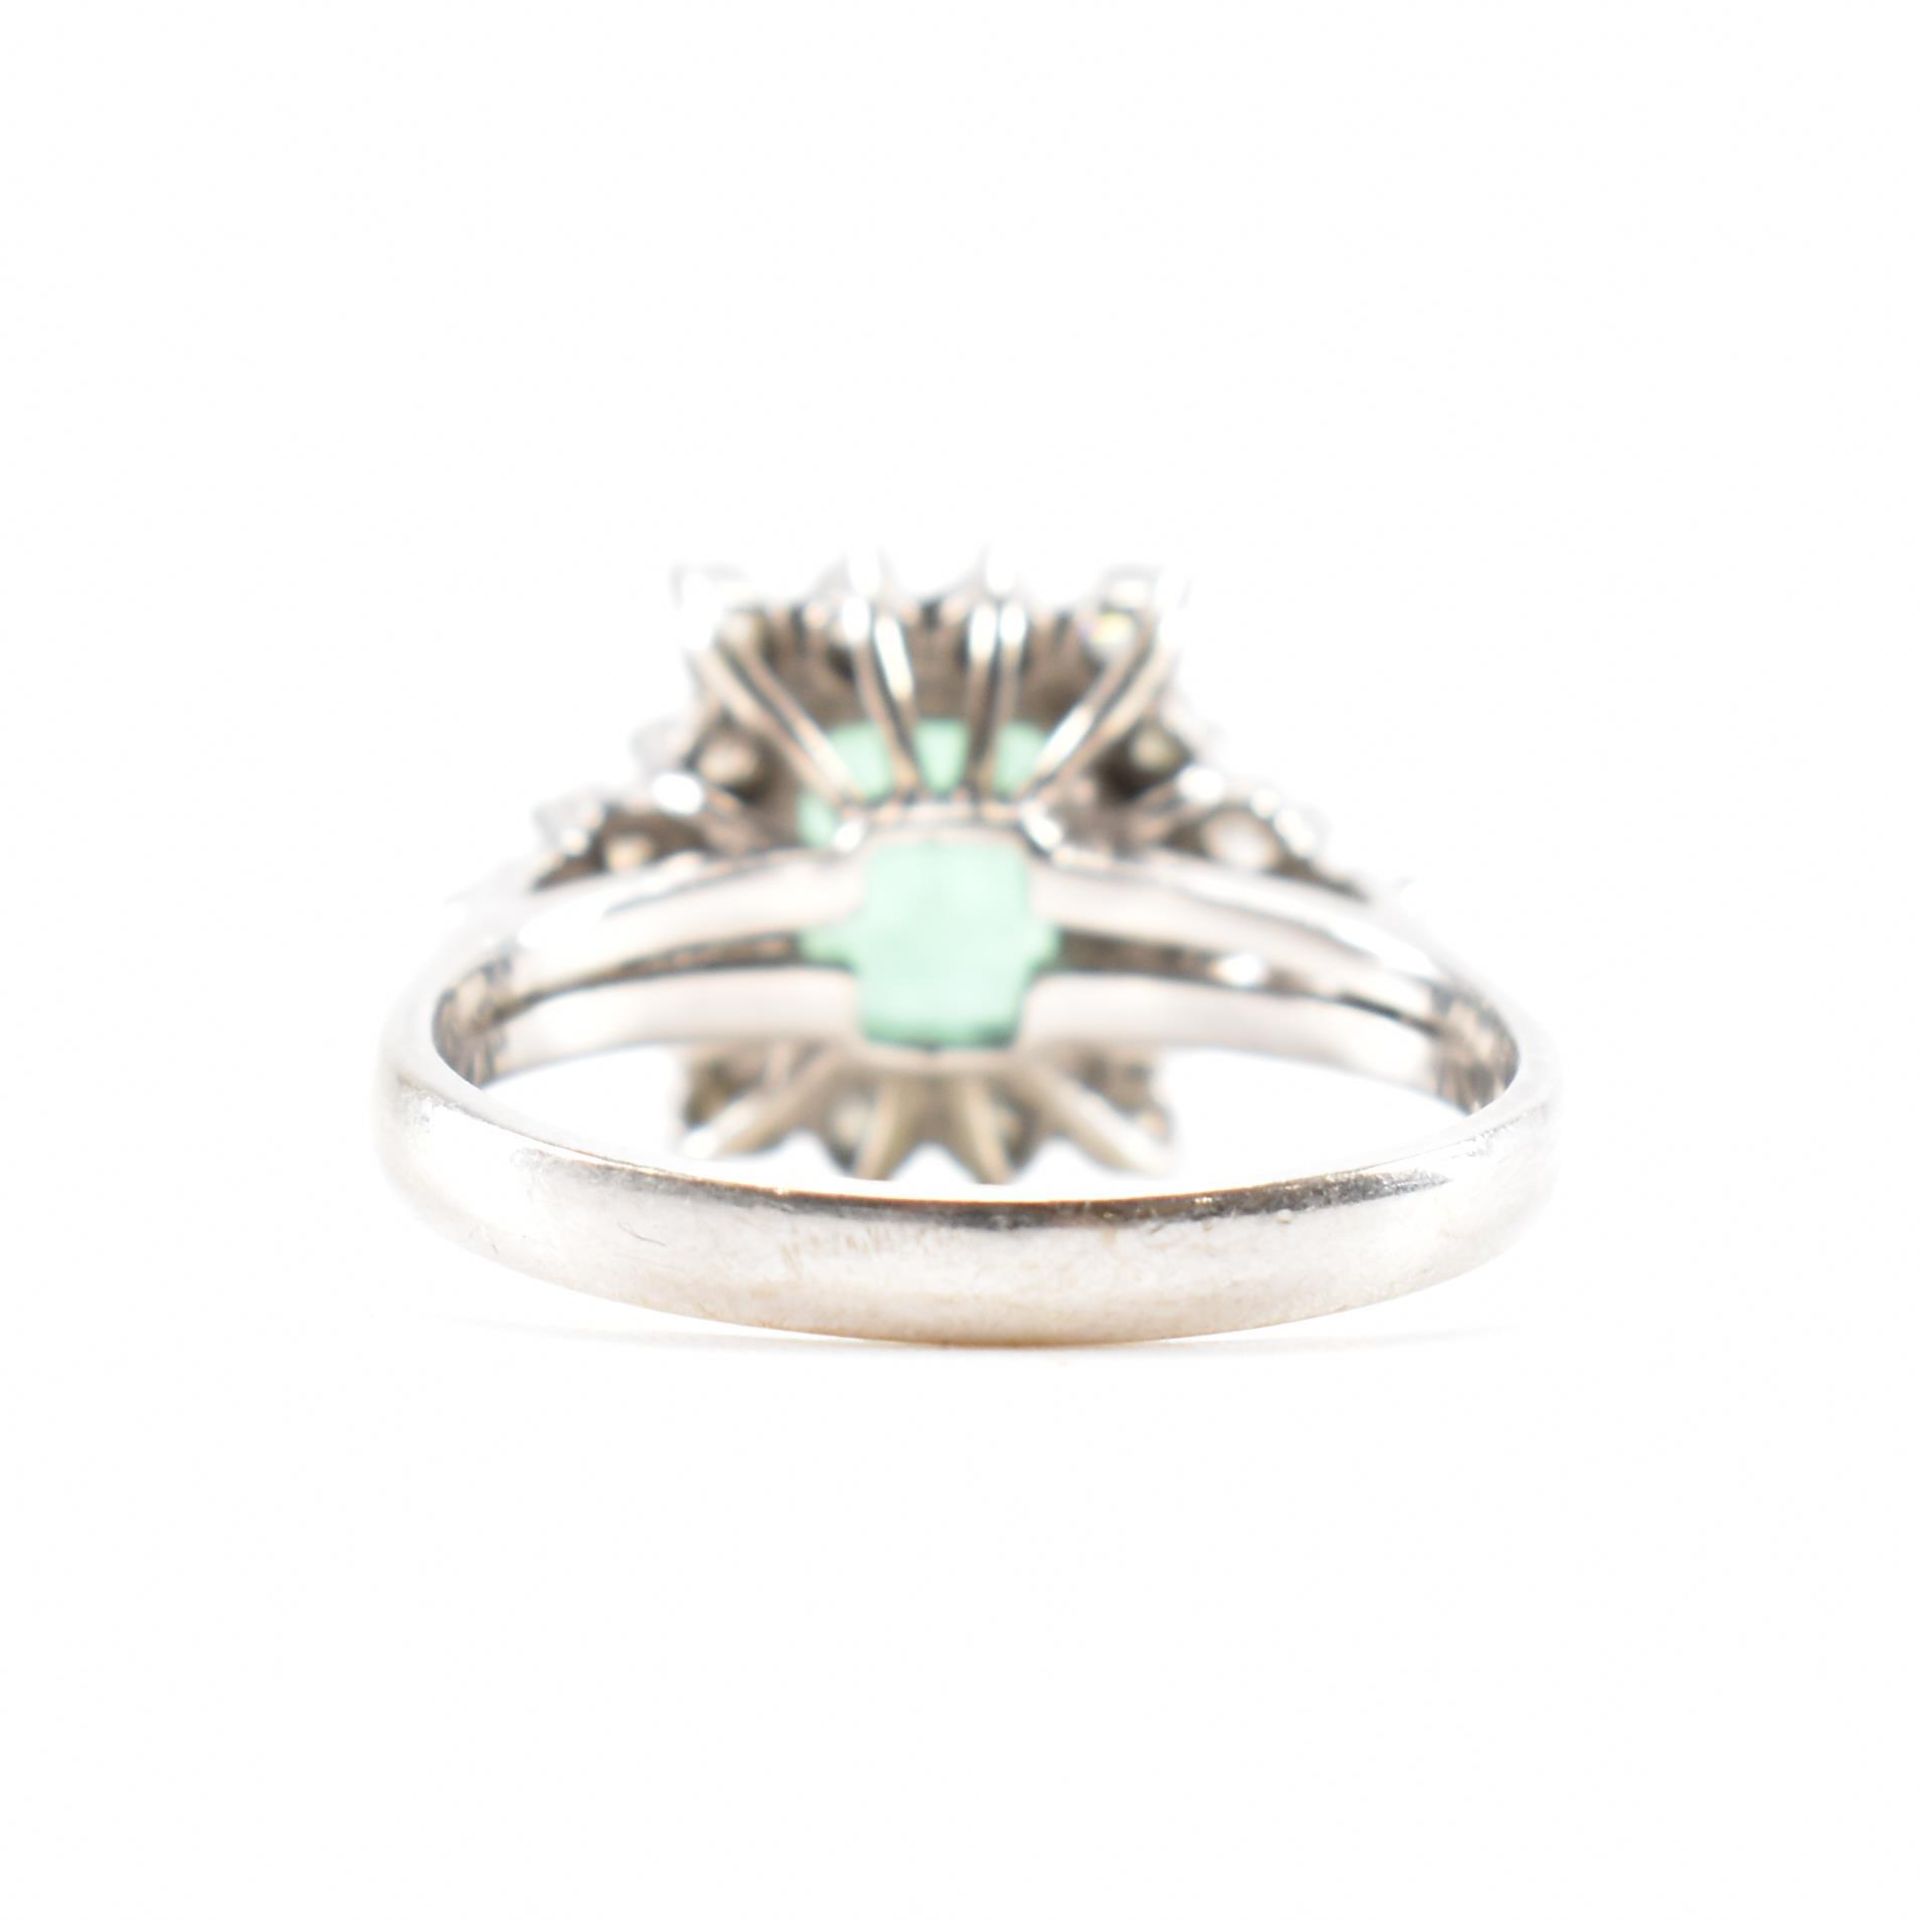 14CT WHITE GOLD EMERALD & DIAMOND CLUSTER RING - Image 3 of 8